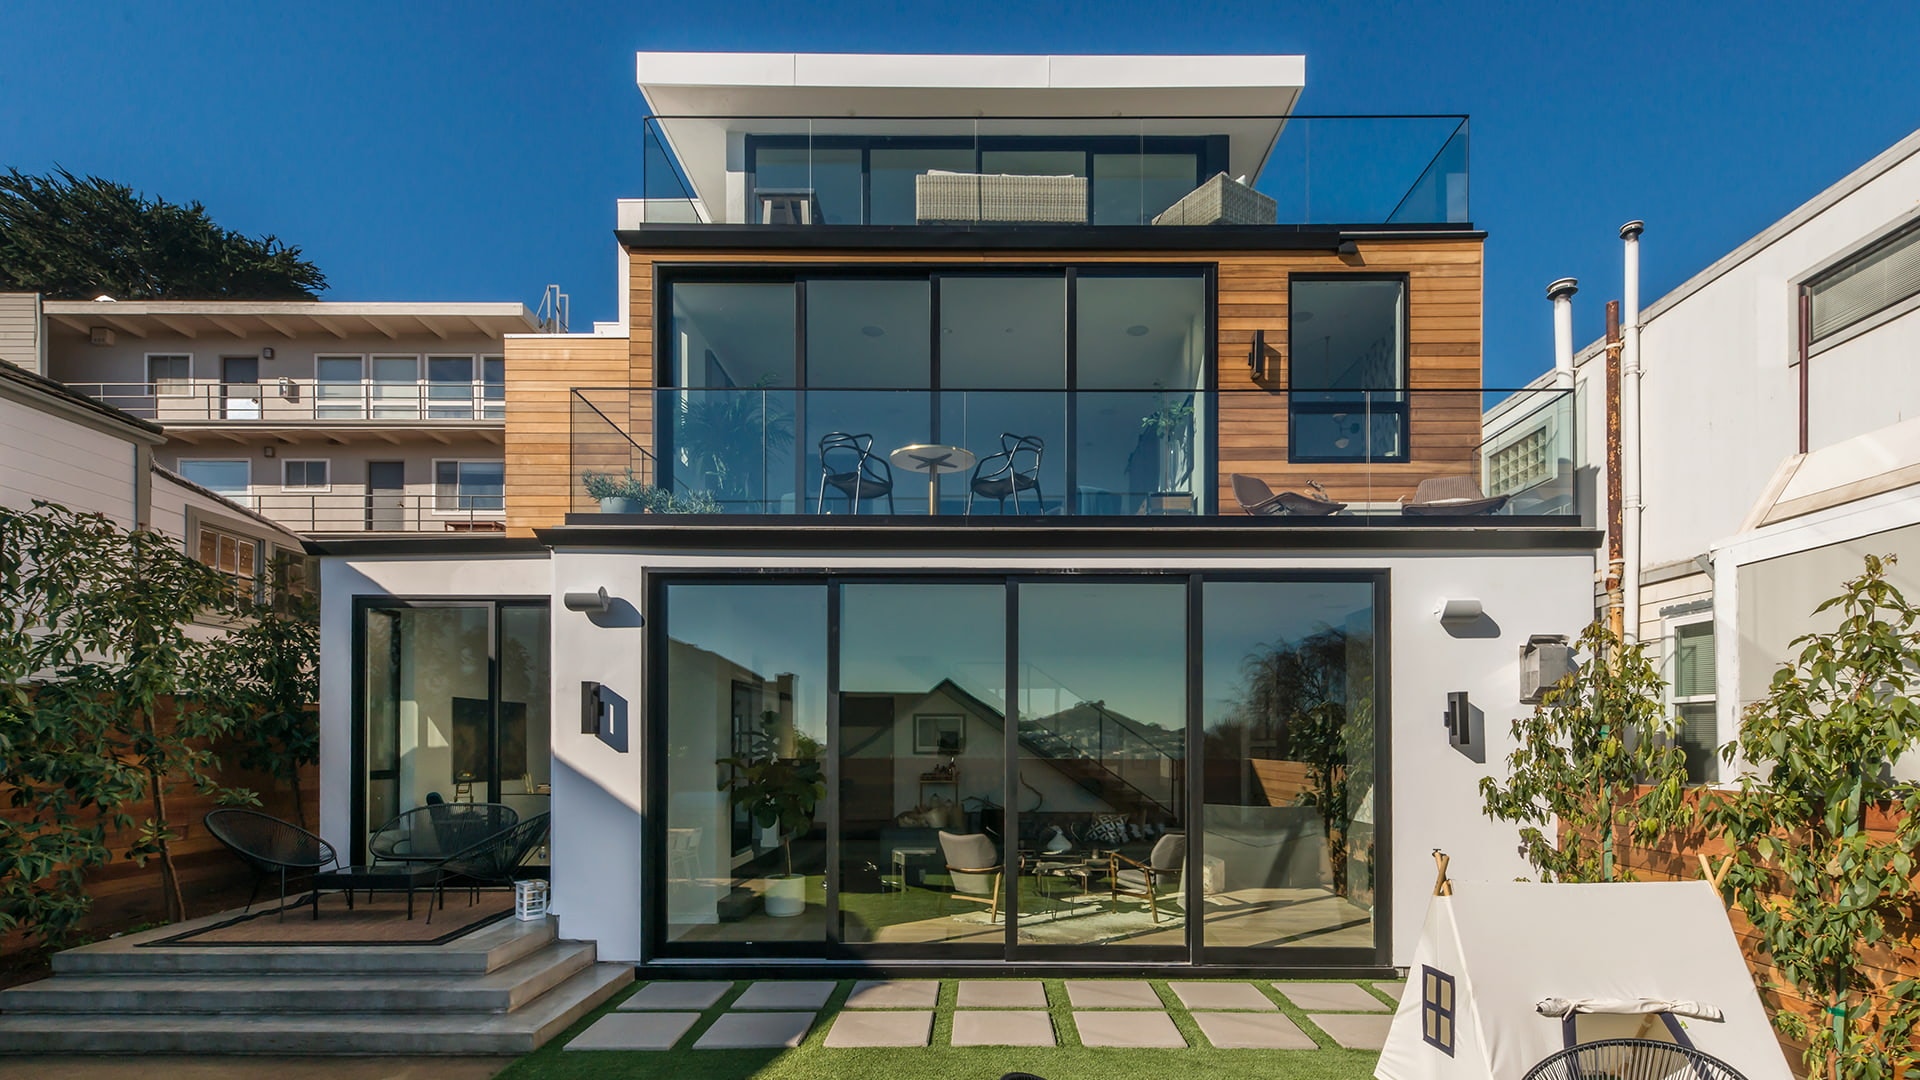 A three-story home, each floor with a four-panel multi-slide door